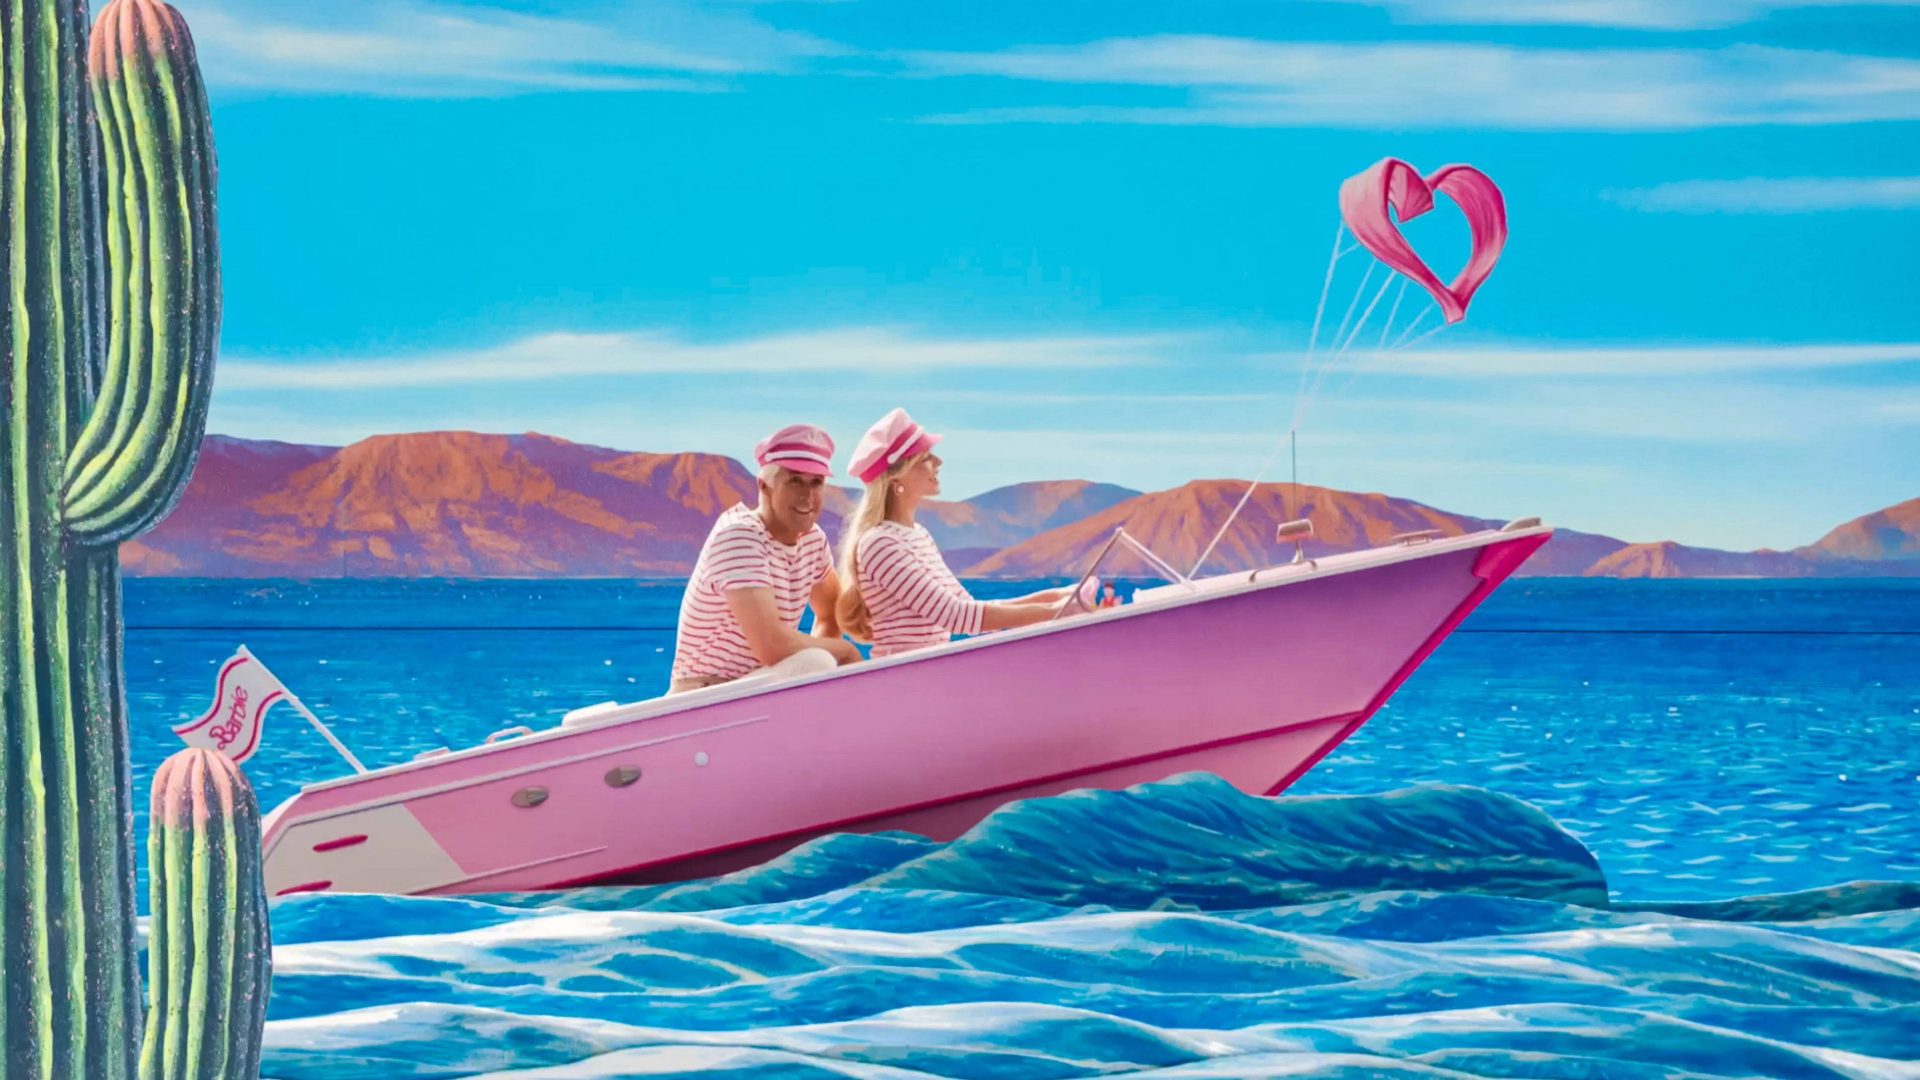 Barbie and Ken from the movie Barbie riding a pink speedboat on a blue lake with blue sky with red mountains in the background and a green cactus in the foreground